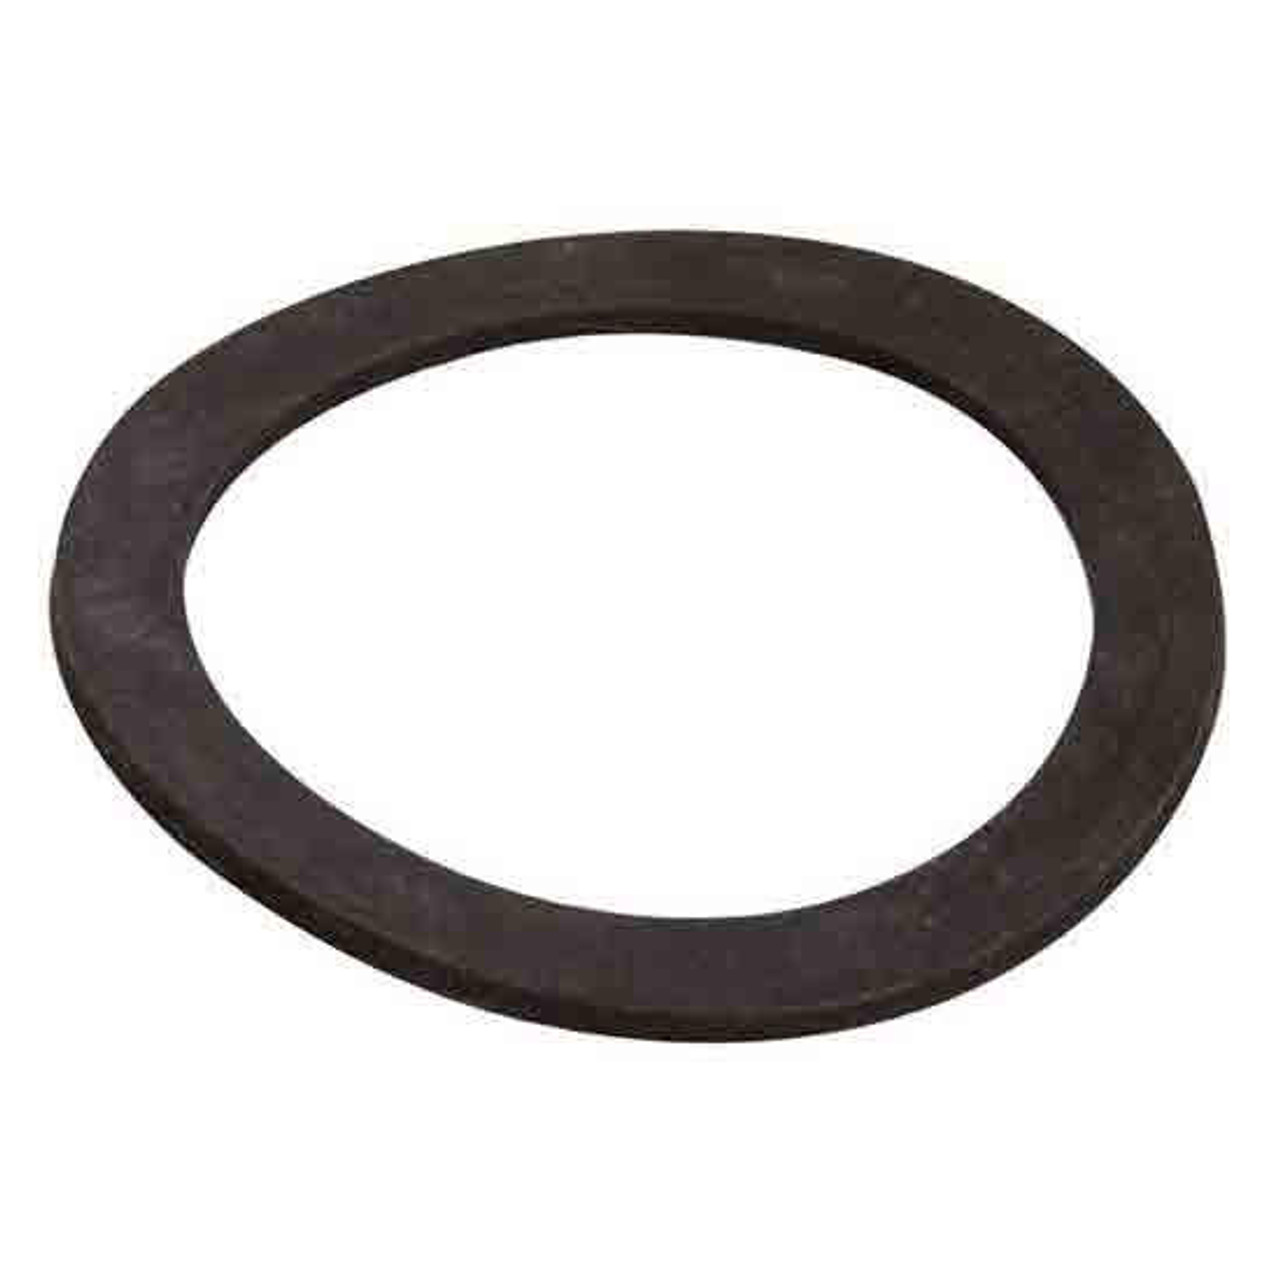 A rubber gasket being used to form a seal between two surfaces